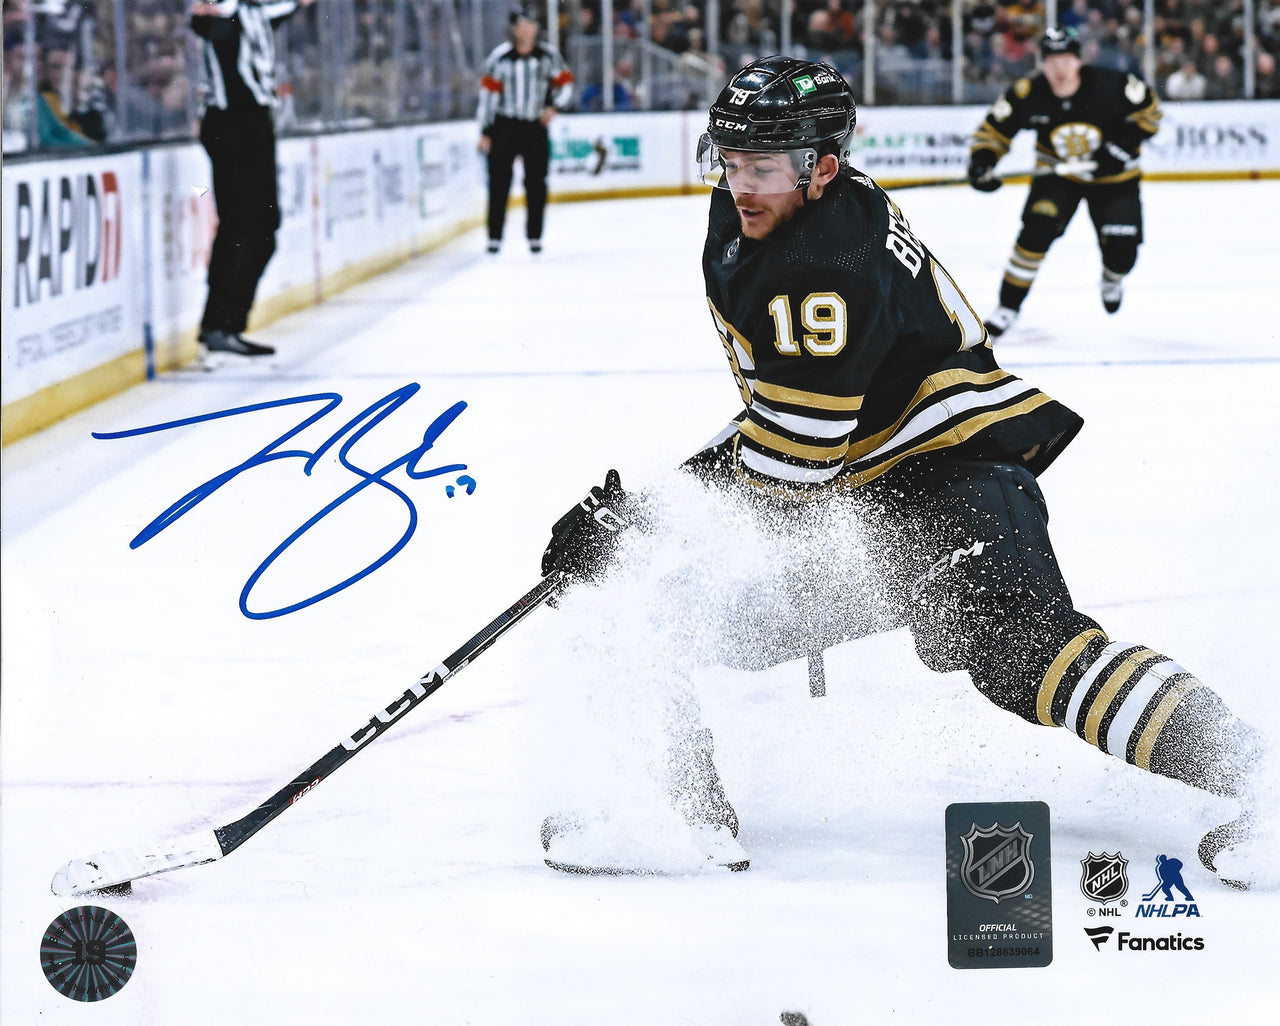 Johnny Beecher in Action Boston Bruins Autographed 11" x 14" Hockey Photo